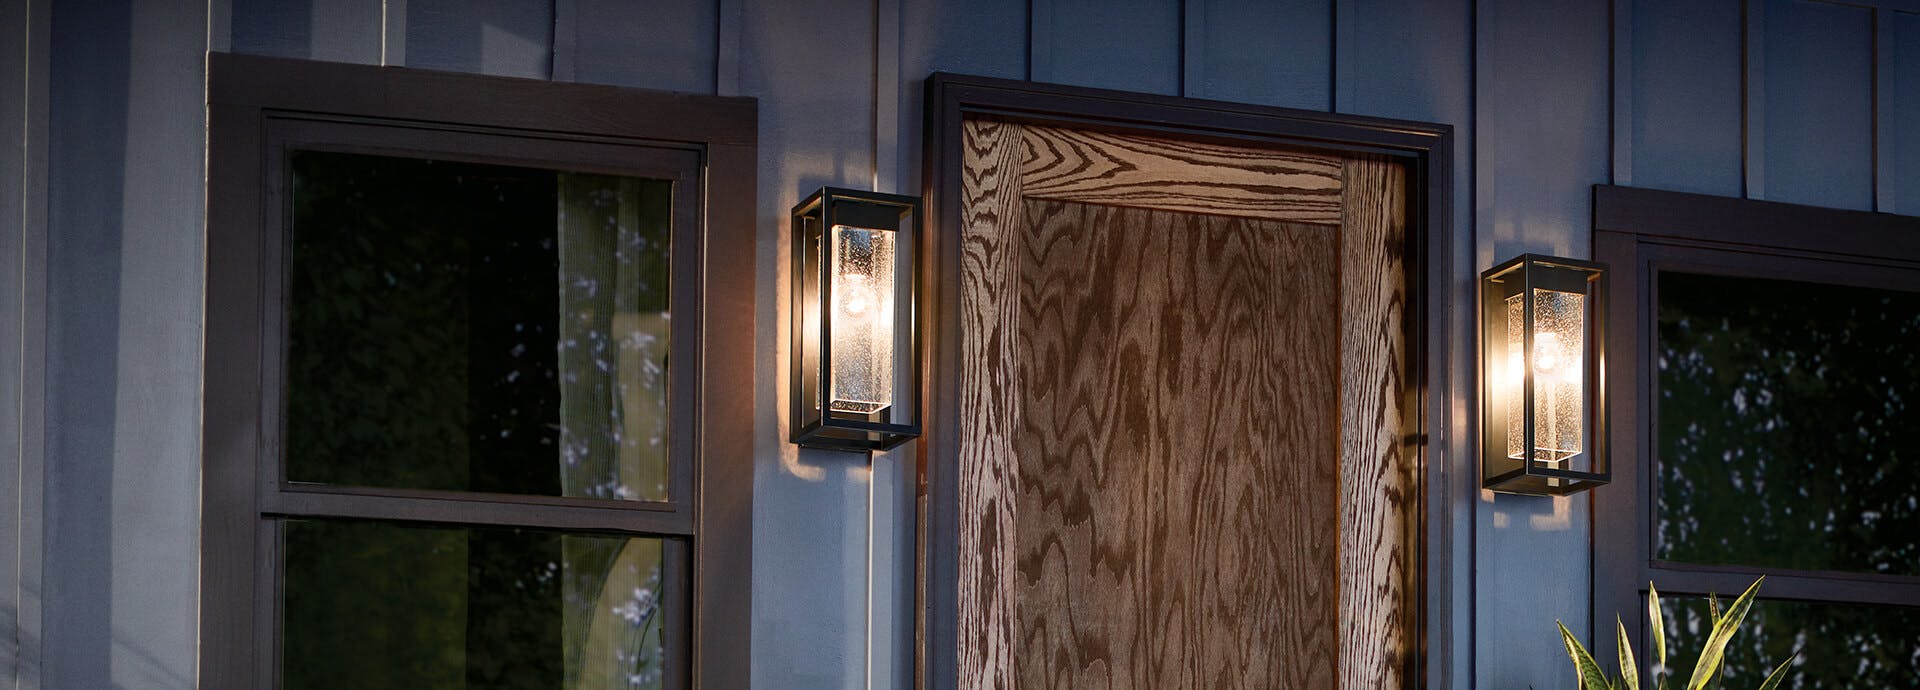 Outdoor patio at night with Mercer sconces on either side of a wooden front door at night